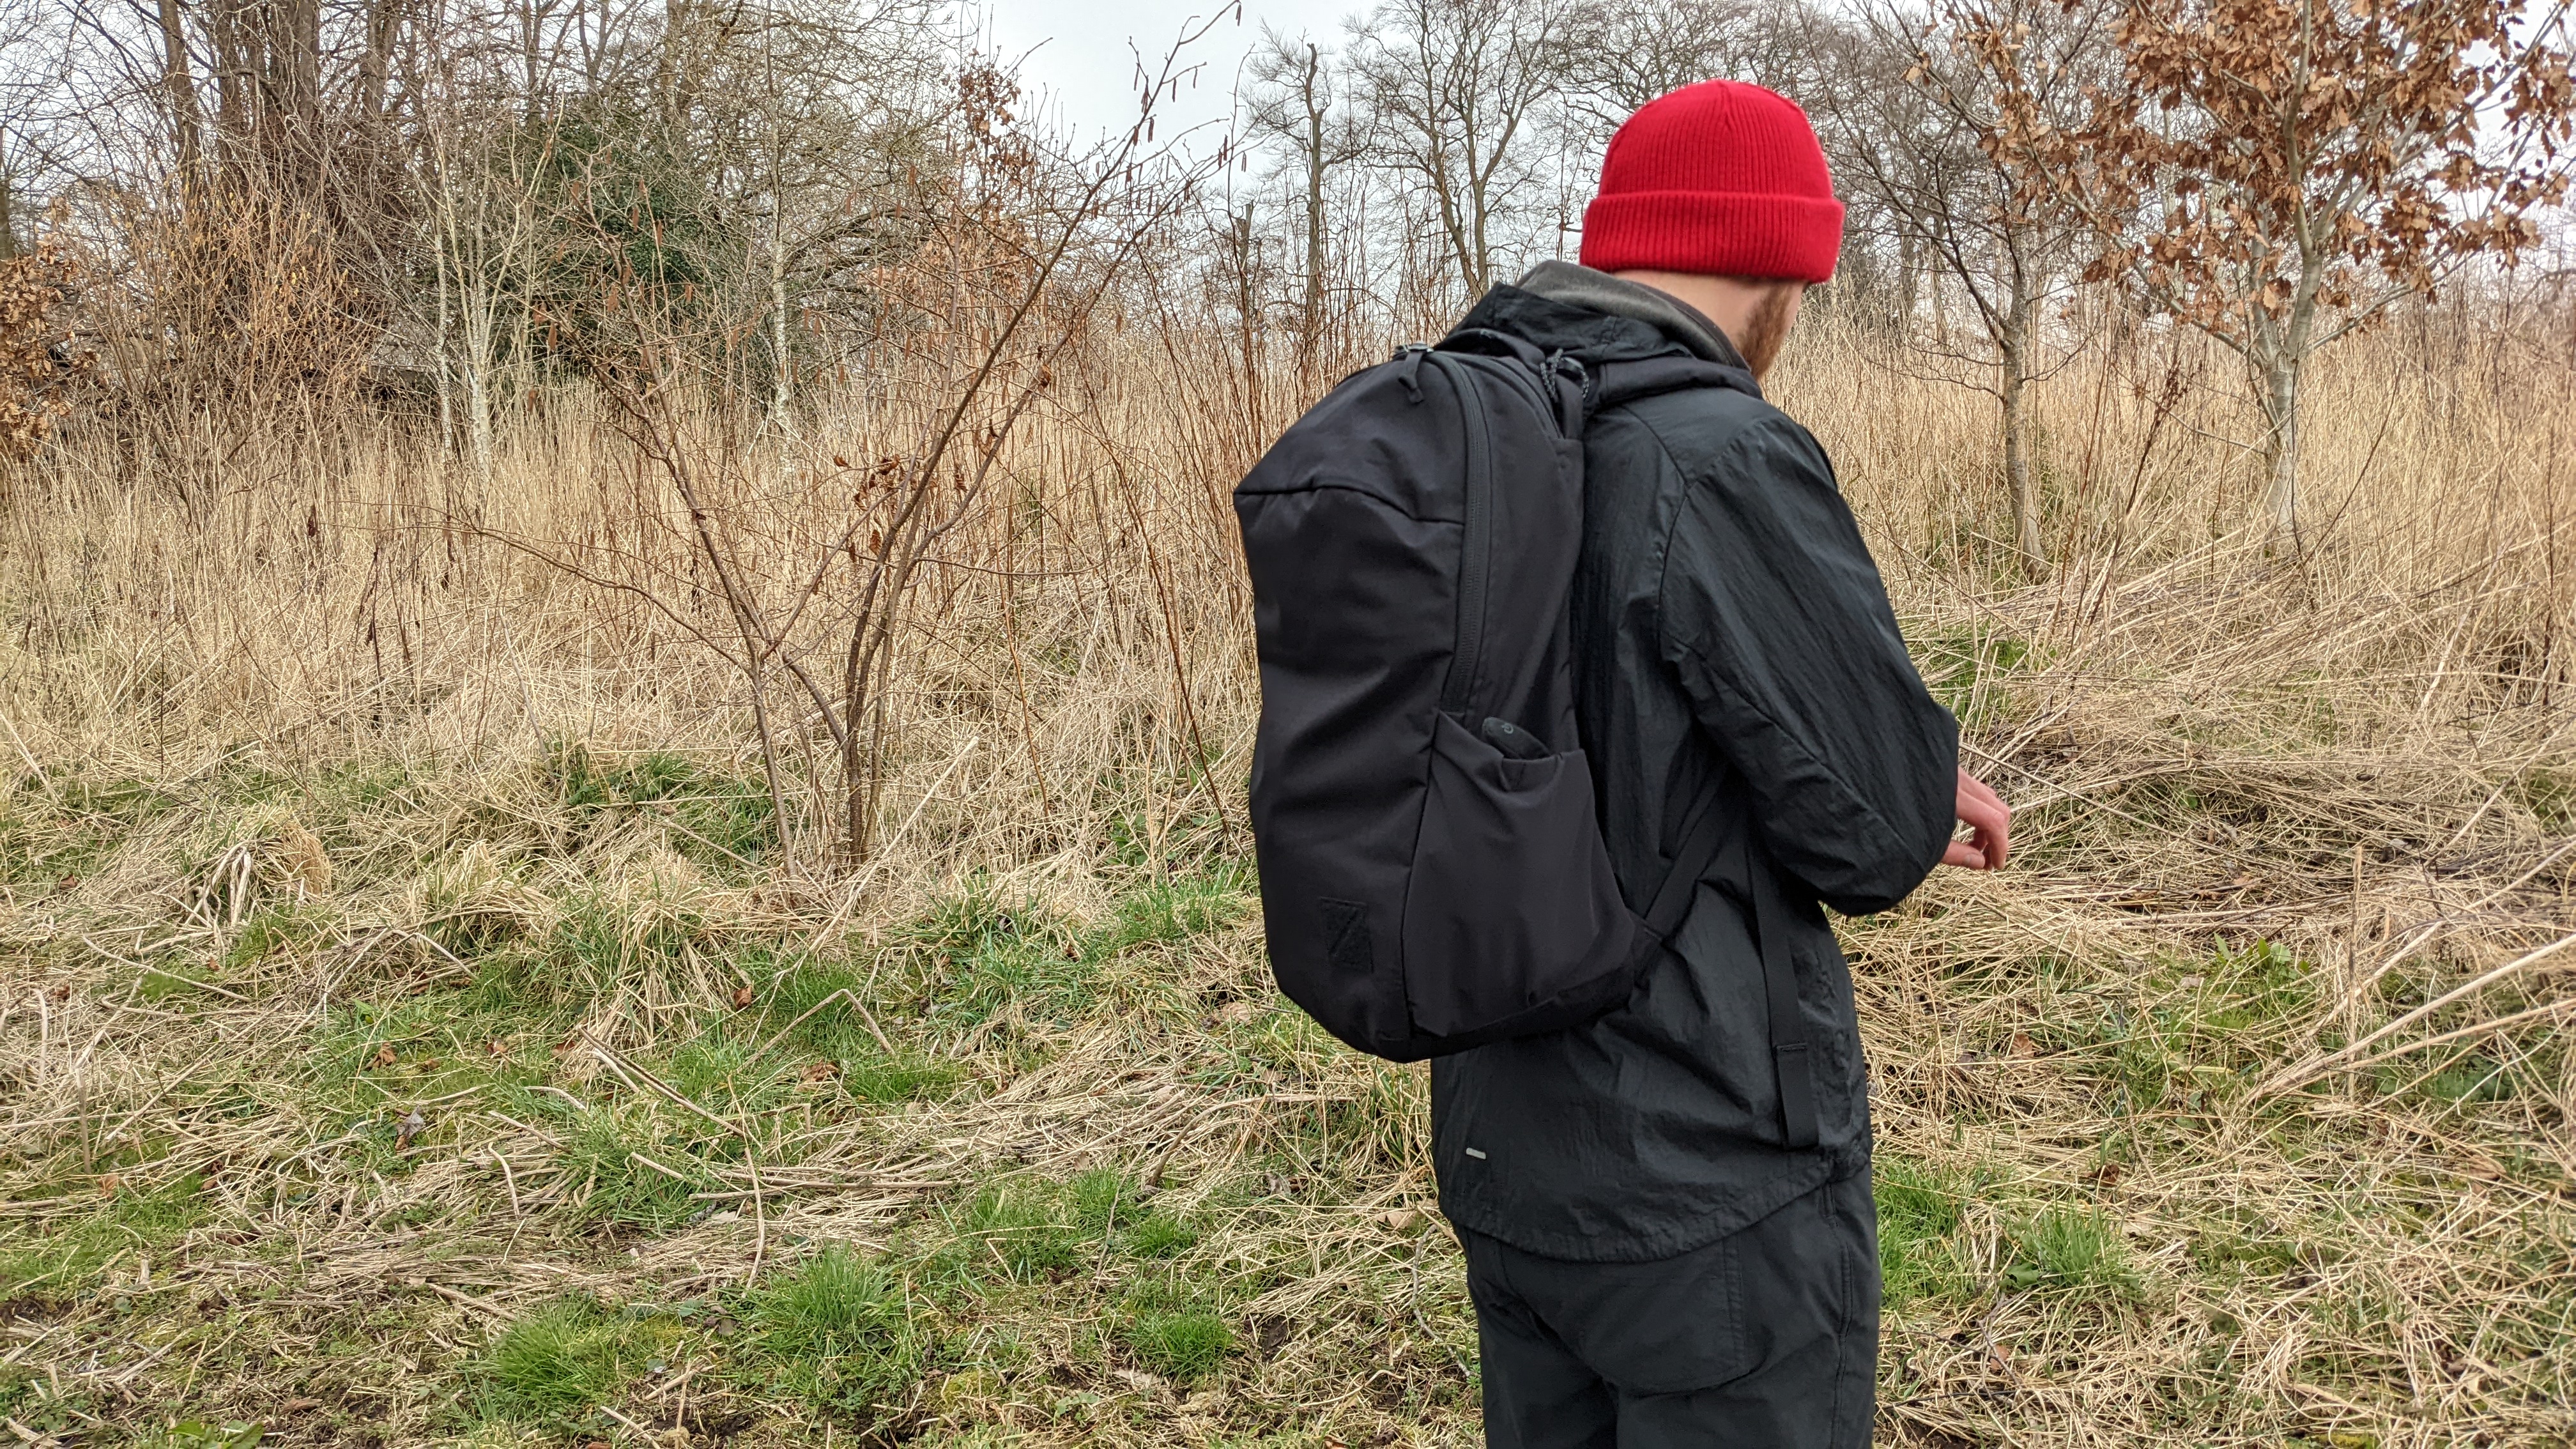 Evergoods Civic Half Zip 26: Review - The Perfect Pack